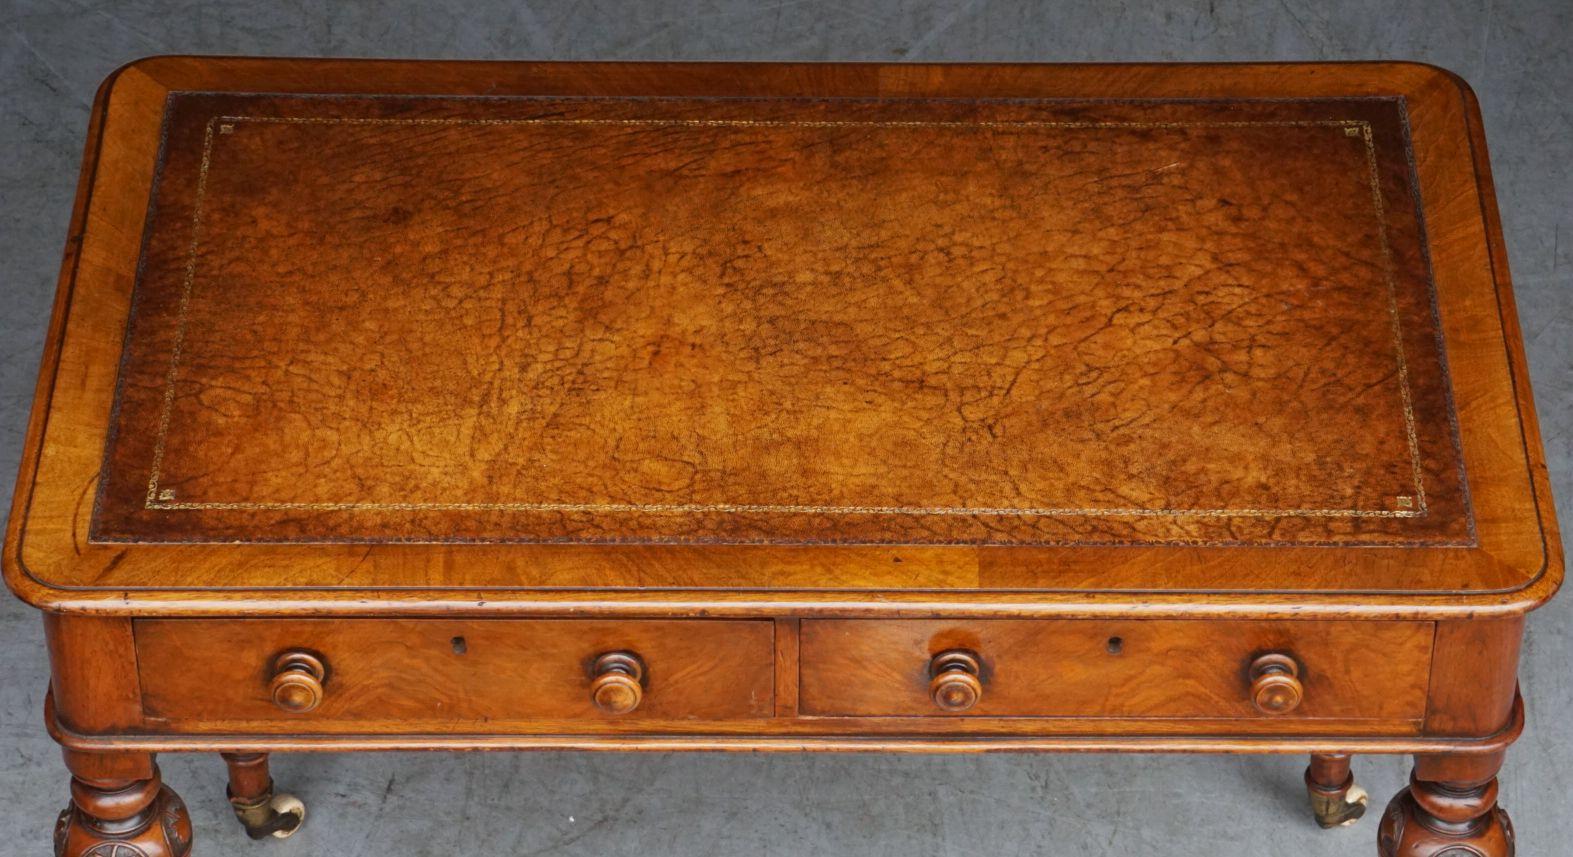 English Writing Desk or Table of Mahogany with Leather Top from the 19th Century 11